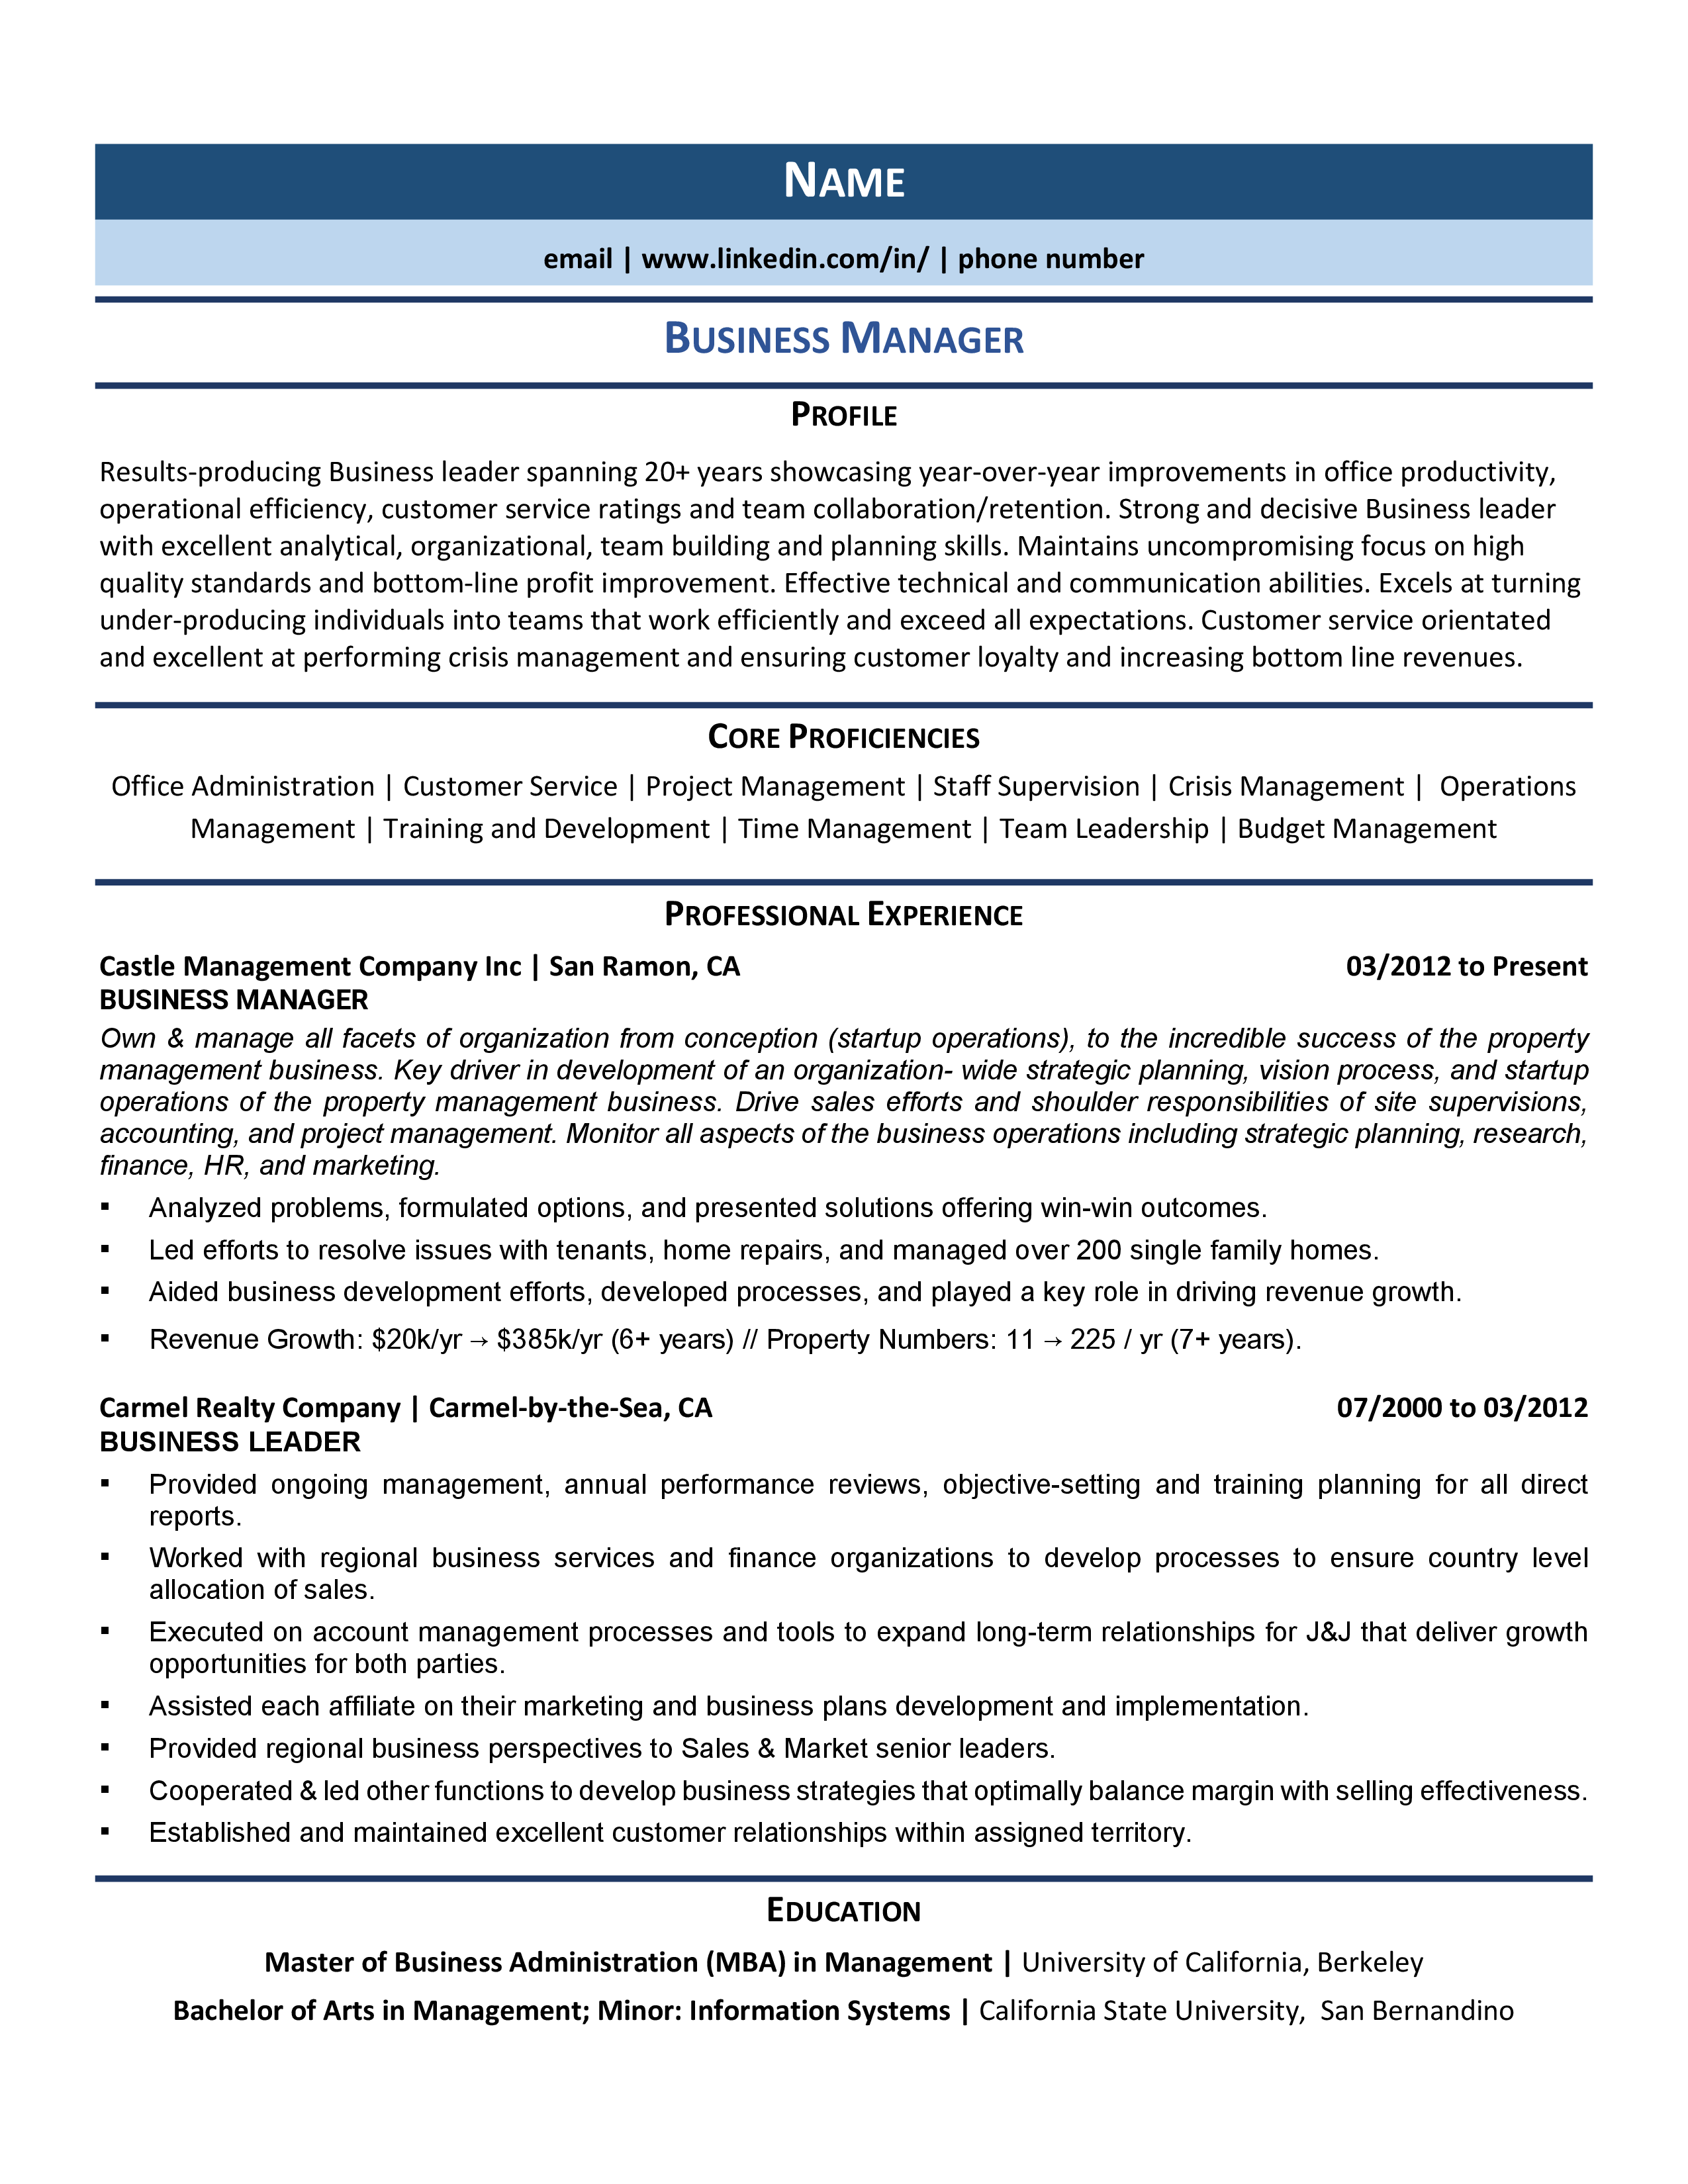 resume examples for business jobs